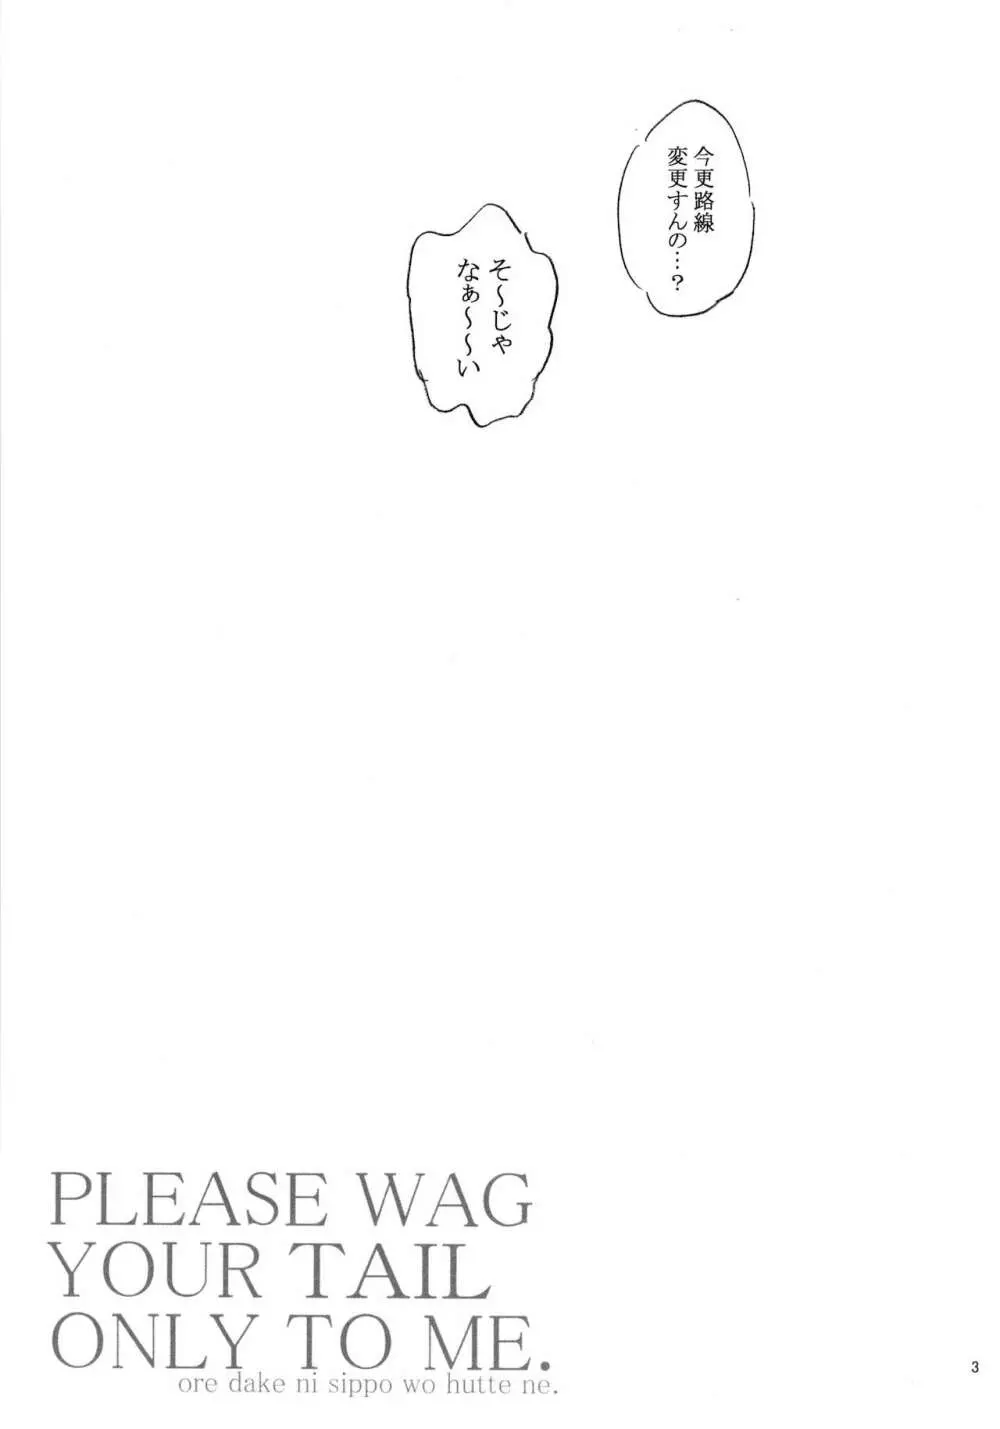 PLEASE WAG YOUR TAIL ONLY TO ME 4ページ